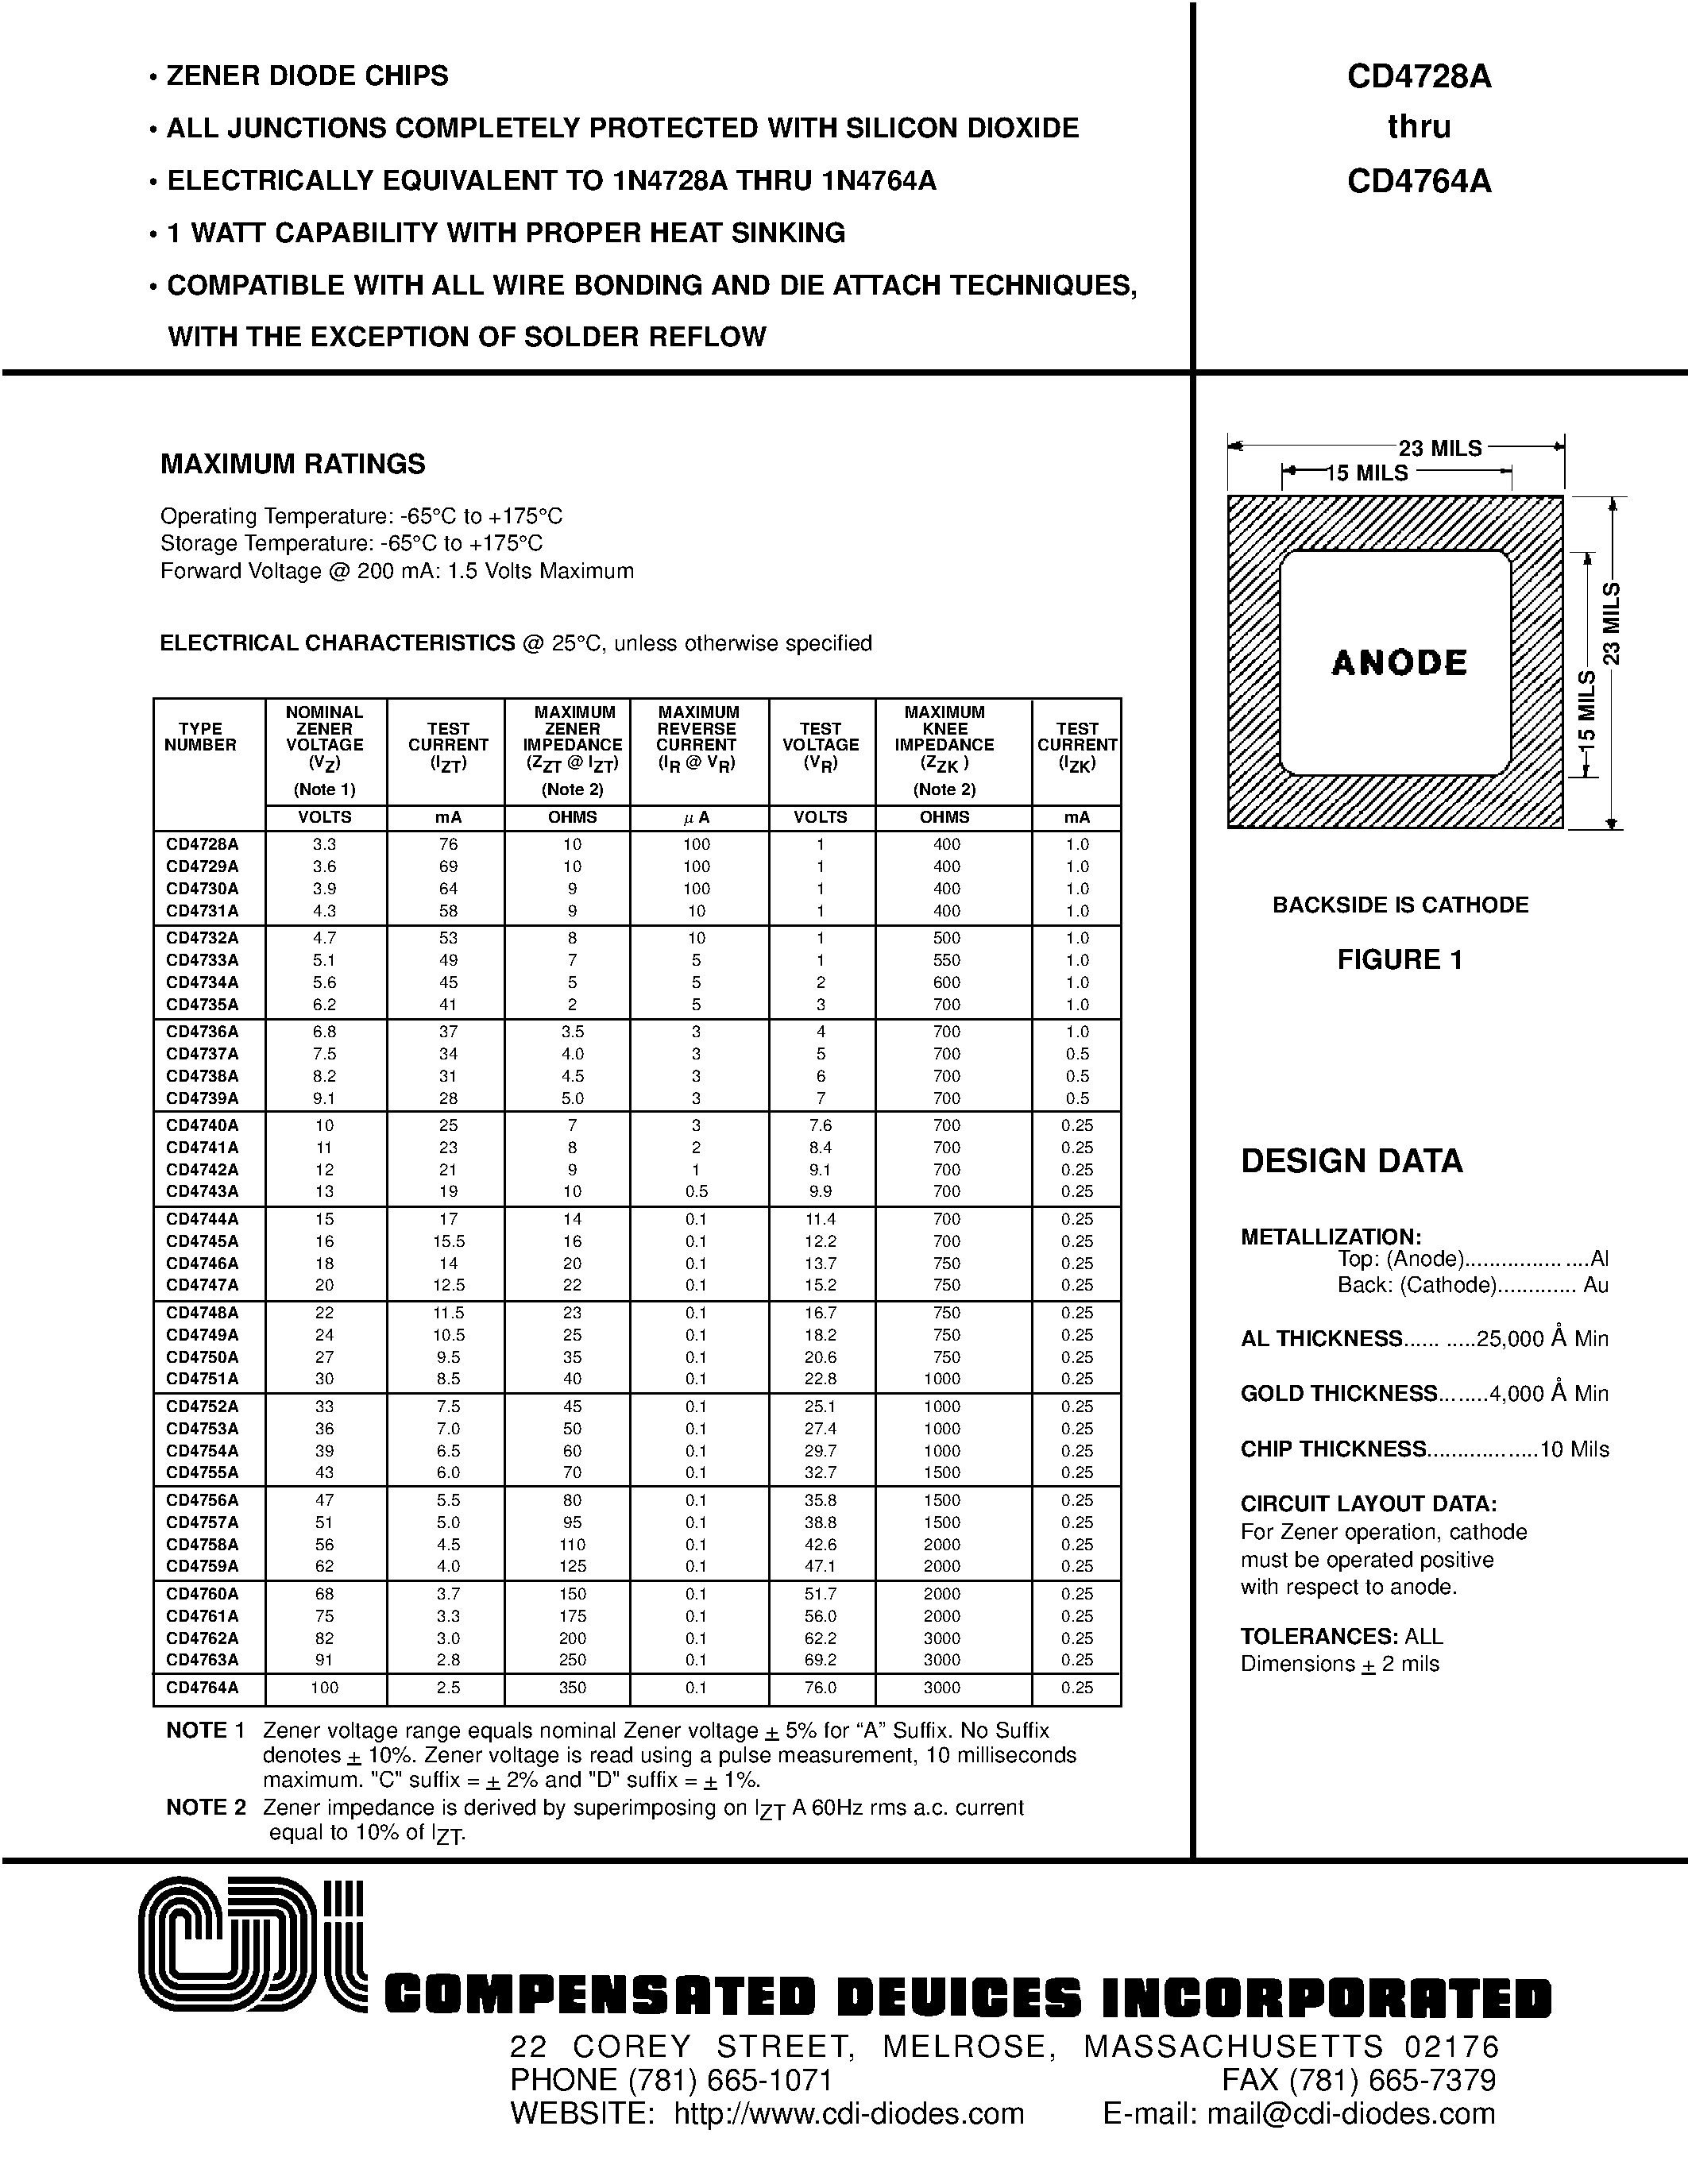 Datasheet CD4738A - ZENER DIODE CHIPS page 1